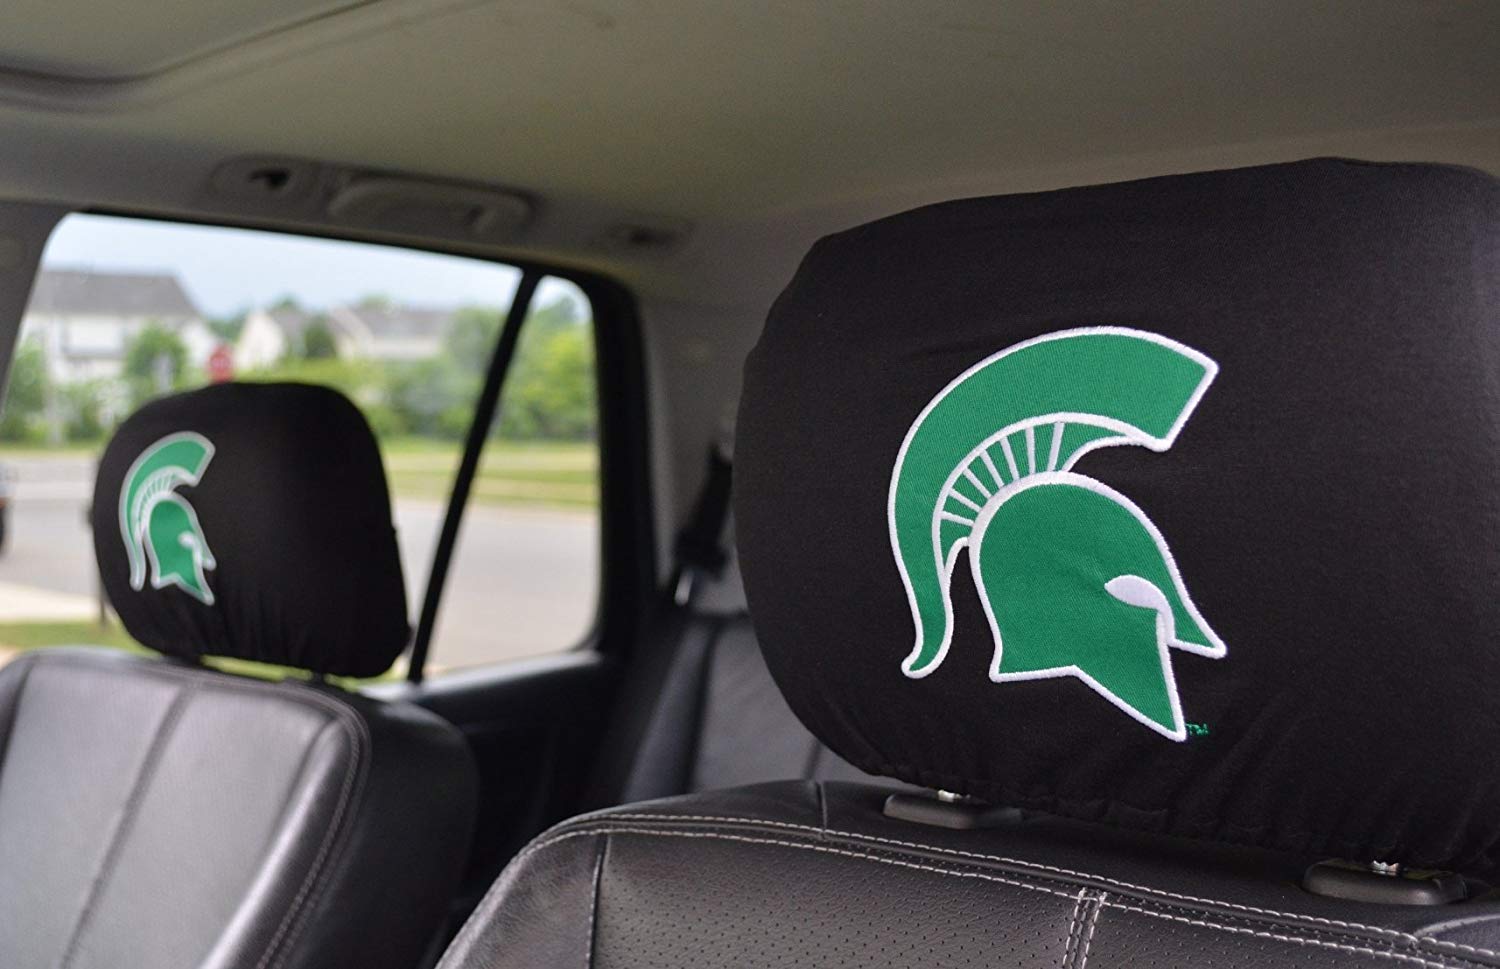 Headrest Cover Official National Collegiate Athletic Association Fan Shop Authentic NCAA Show School Pride Everywhere You Drive